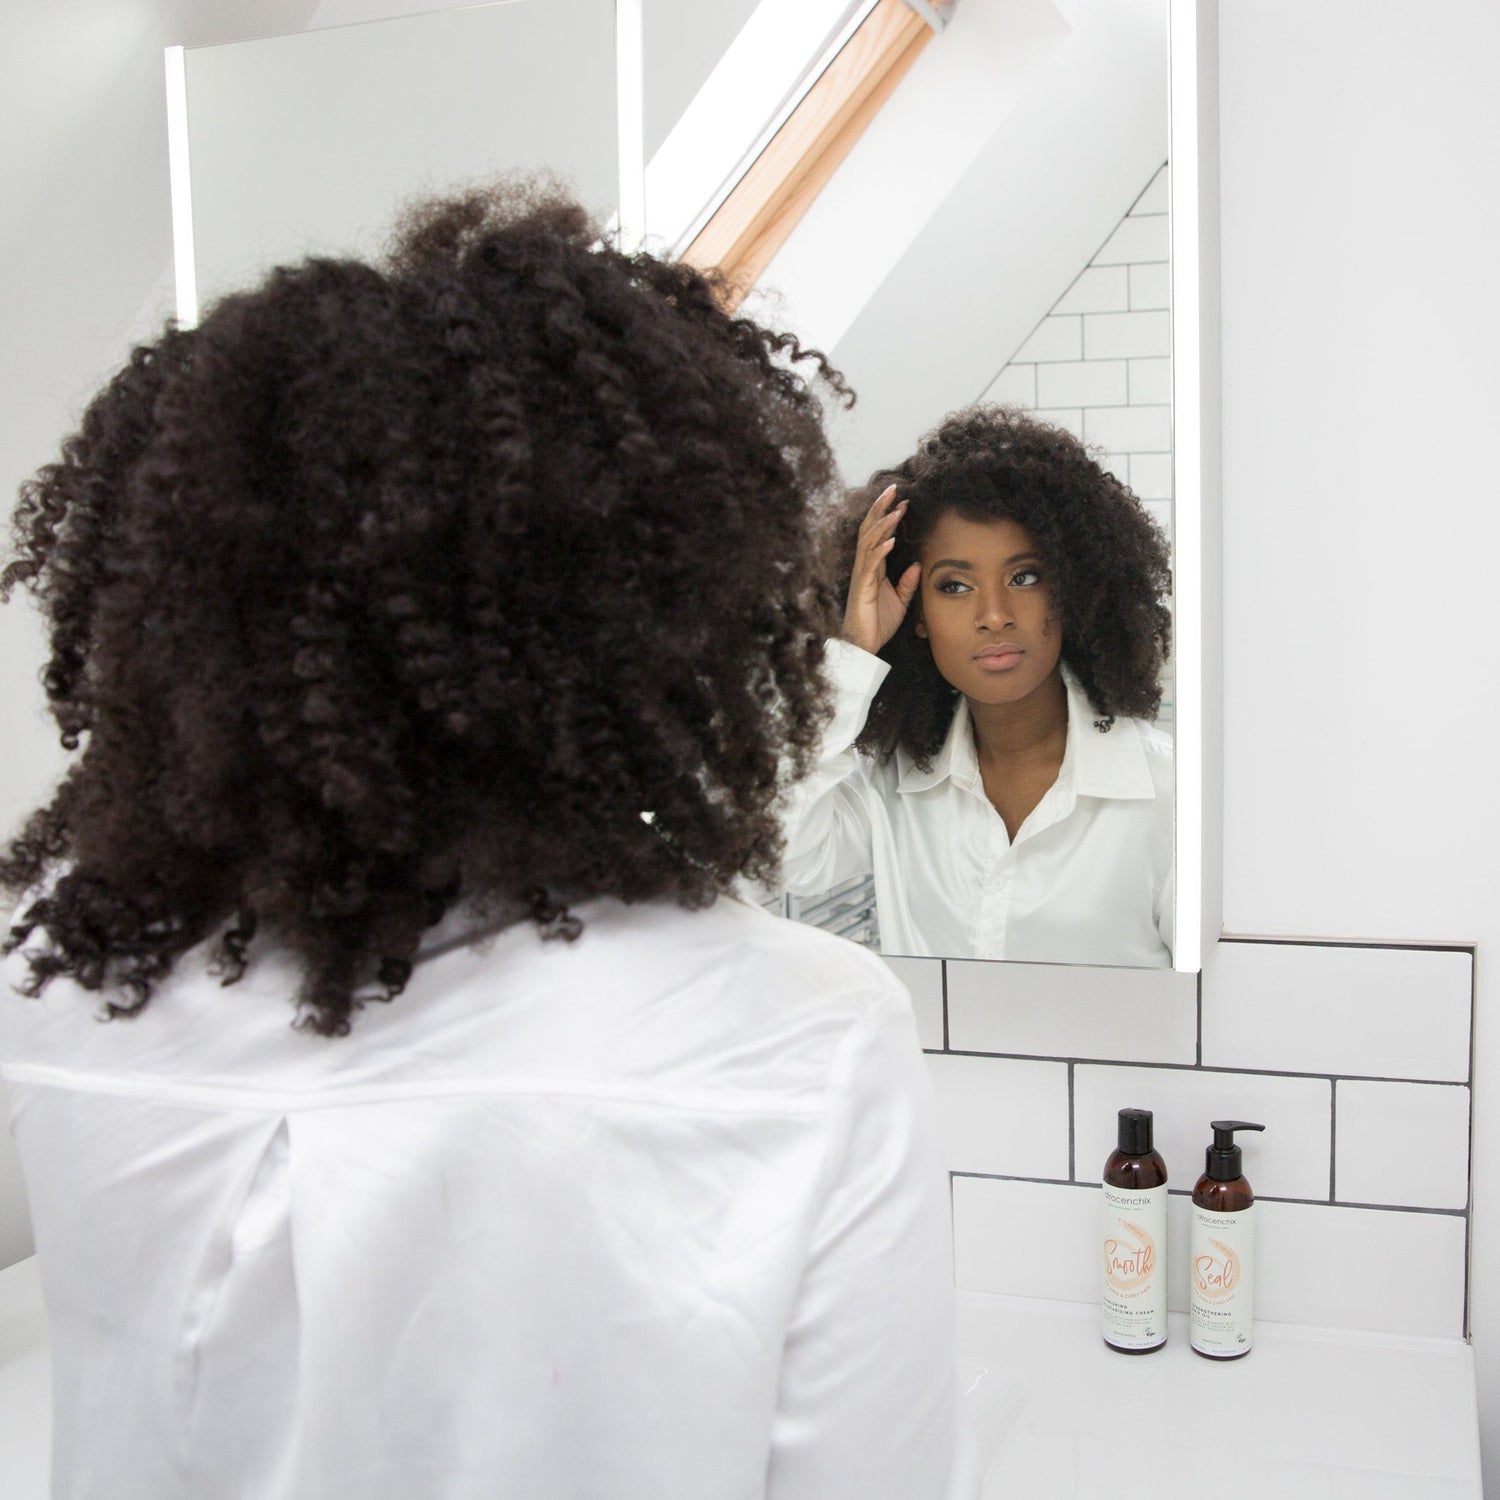 Afrocenchix Blog posts Everything you need to know about afro hair loss: Young black black woman wearing white looking in mirror touching hair